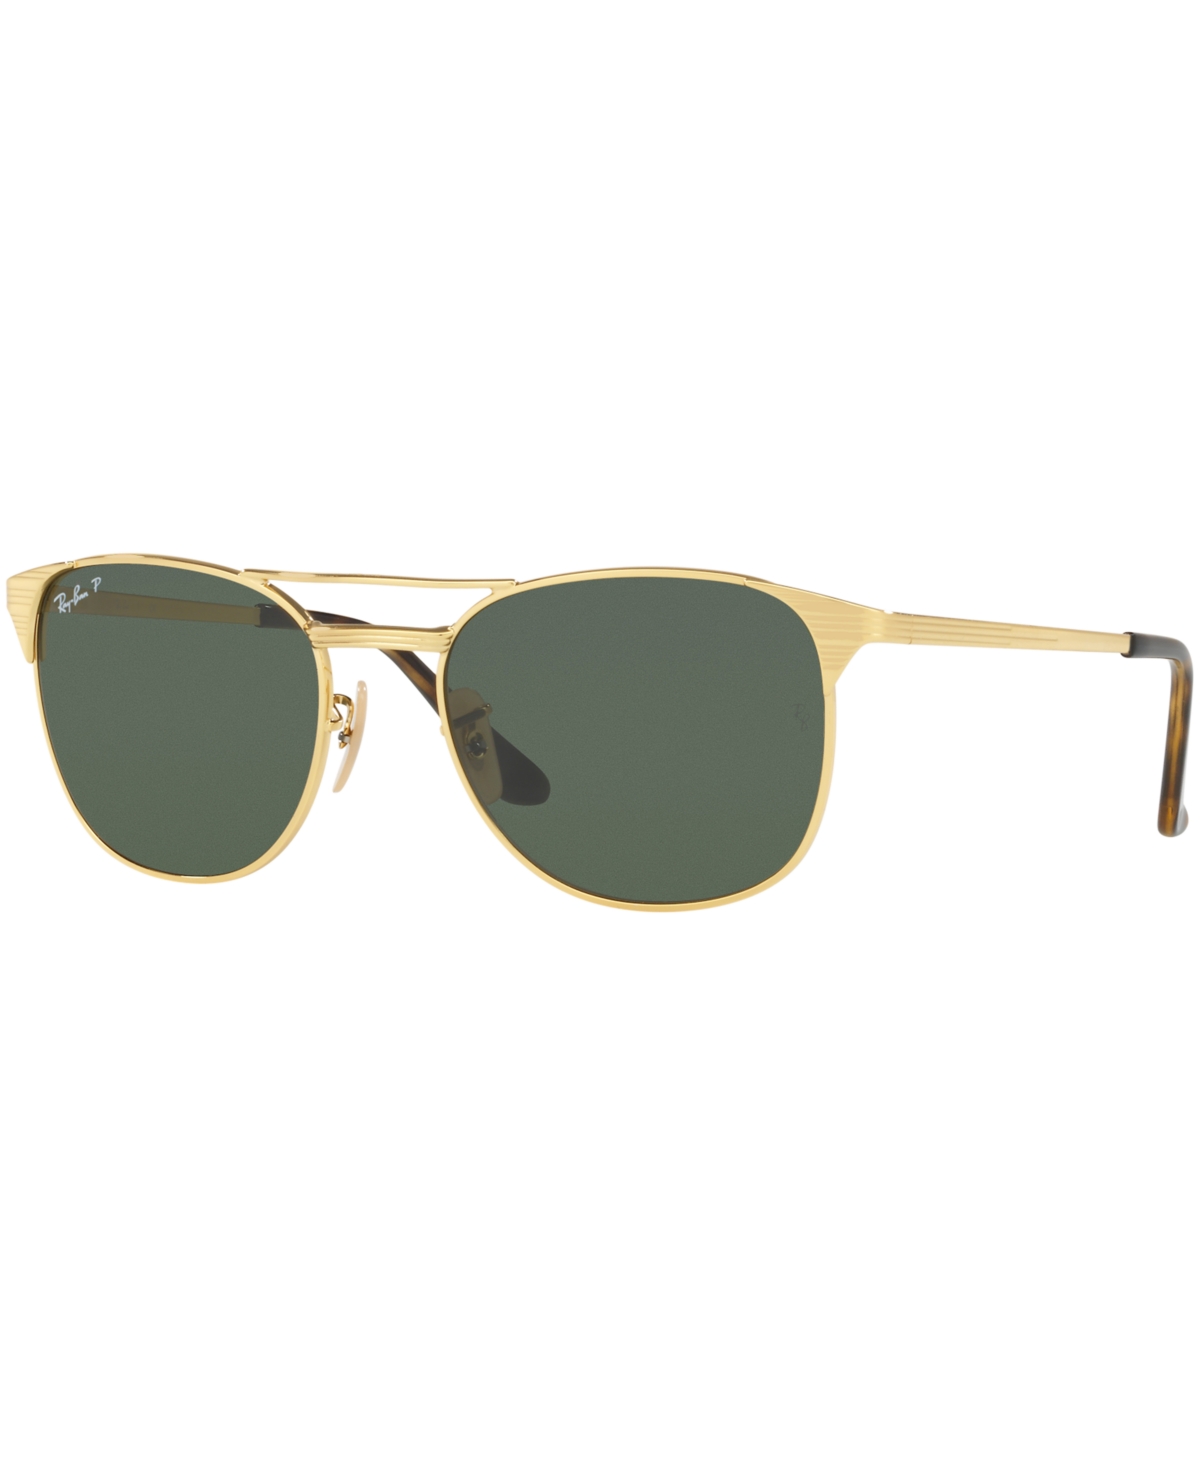 Ray Ban Polarized Sunglasses, Rb3429m Signet In Gold,green Polar